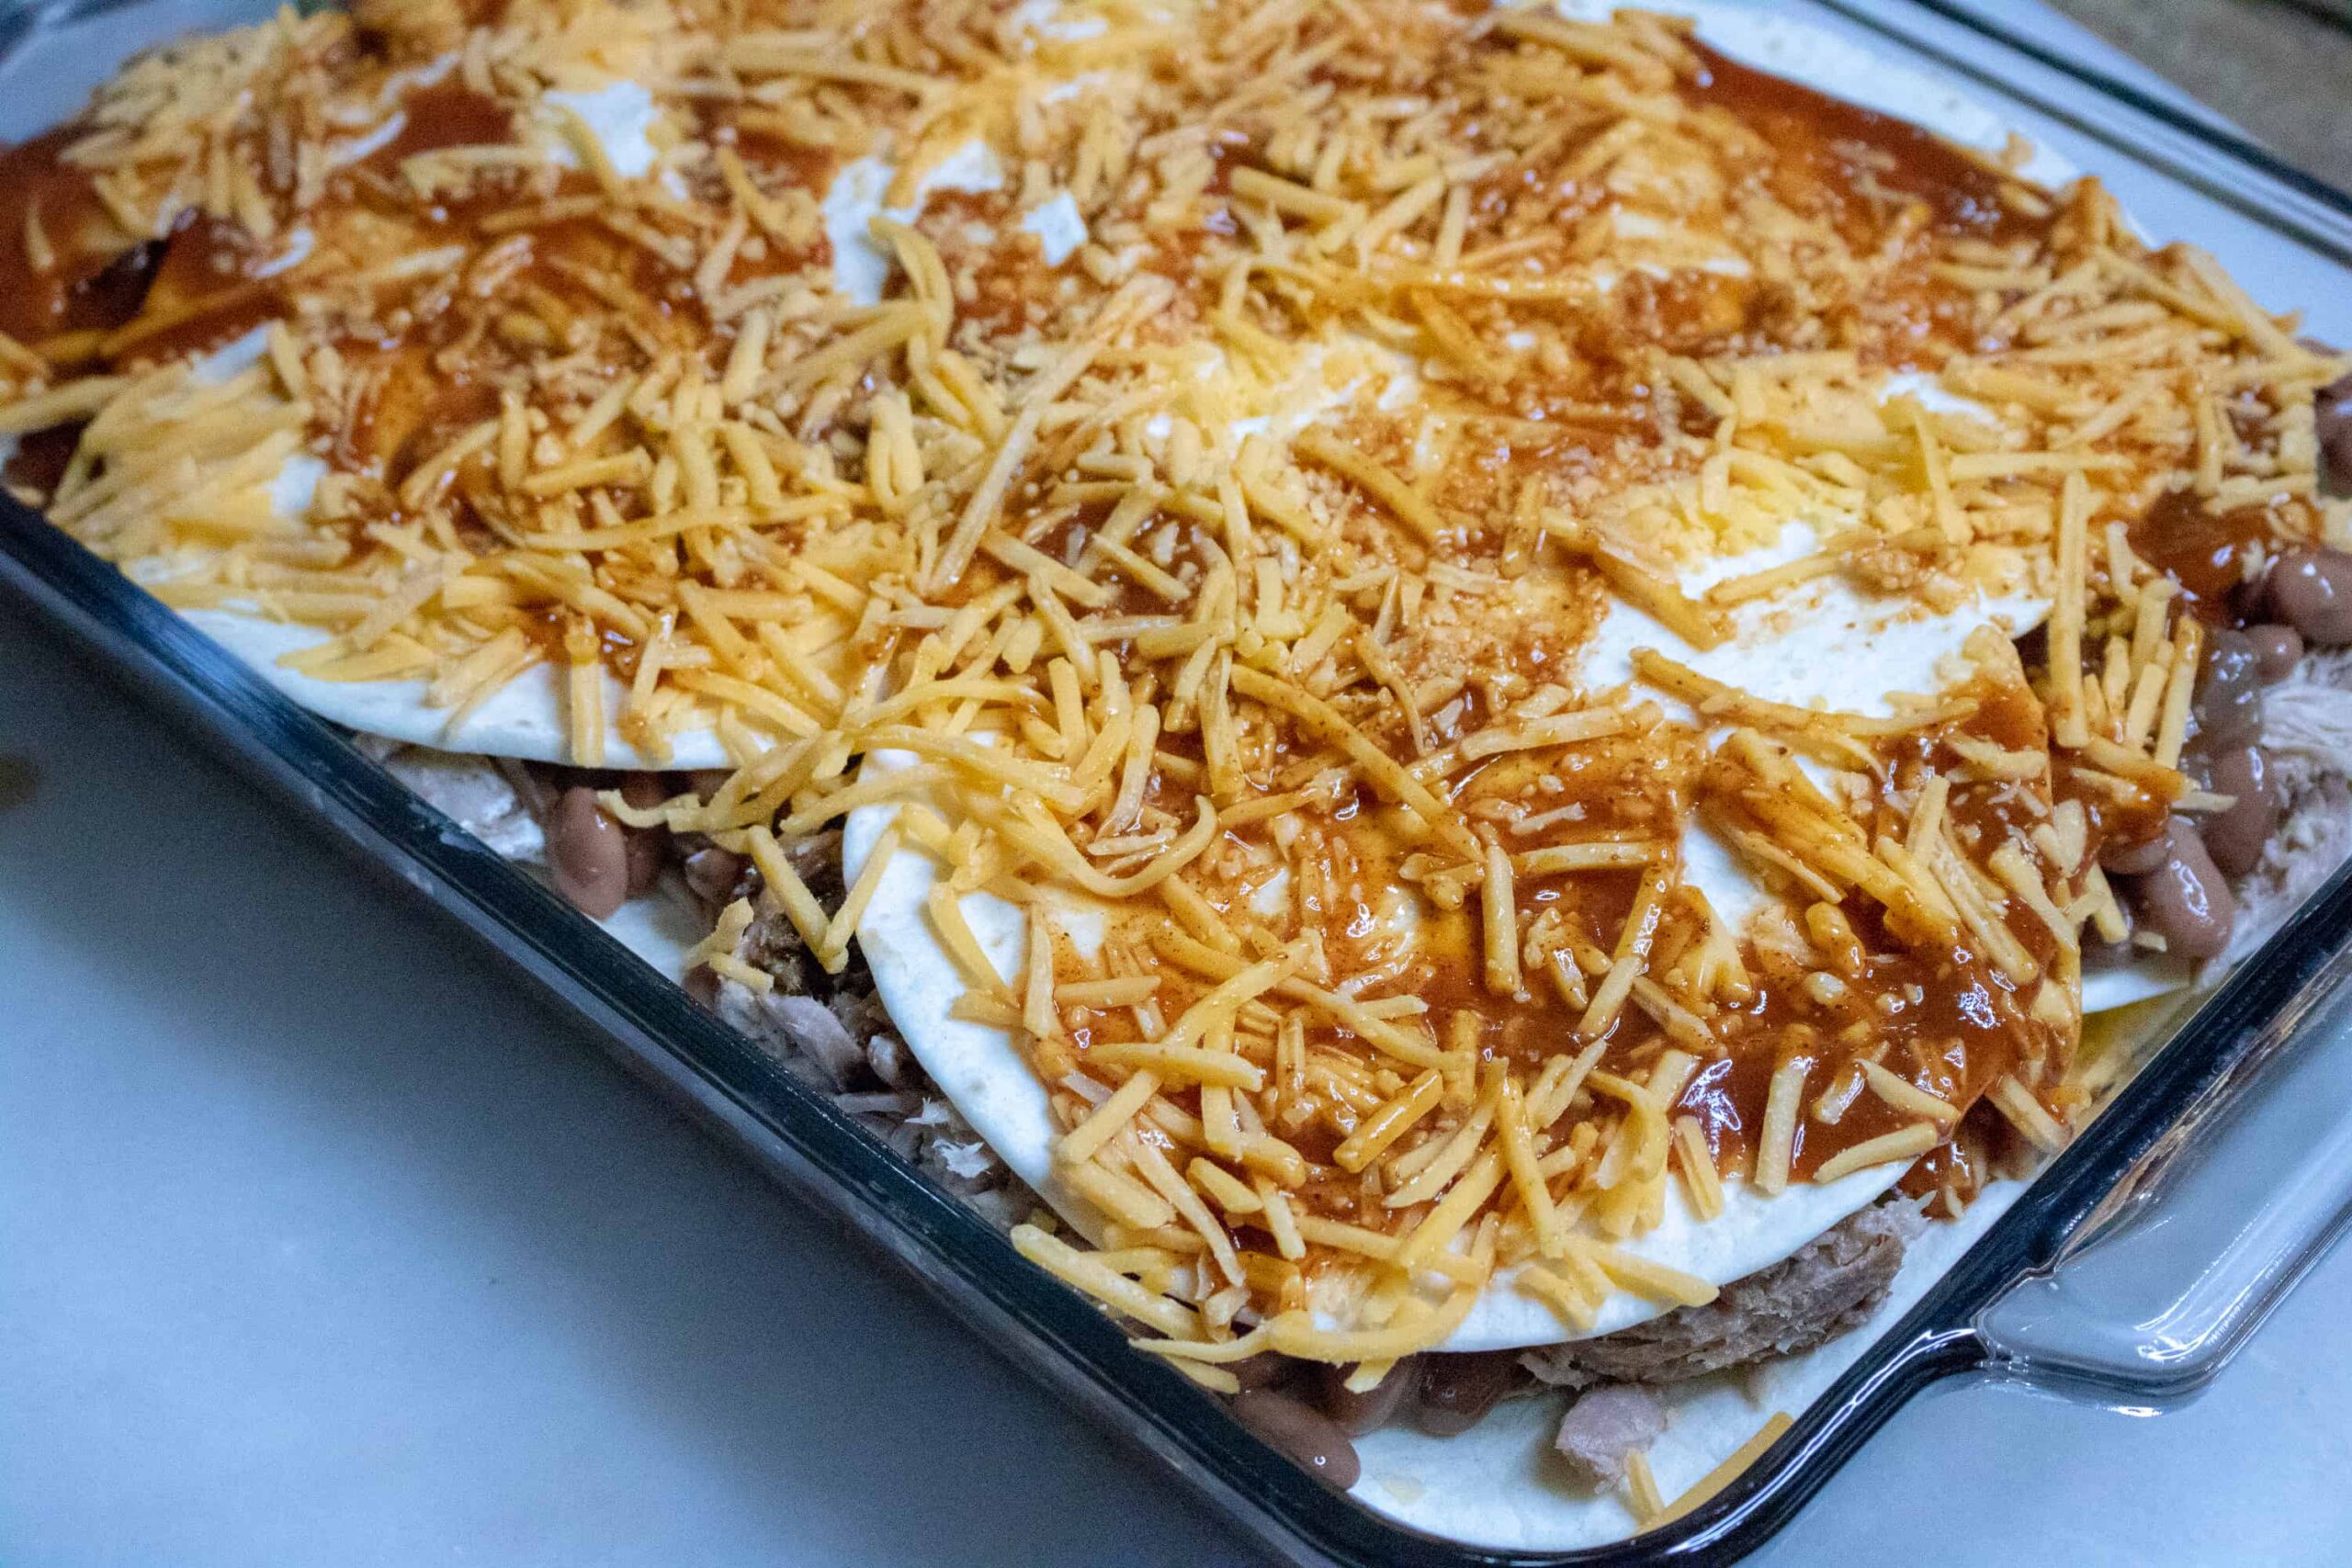 Shredded cheese for Pork Enchilada Casserole on top of other ingredients.